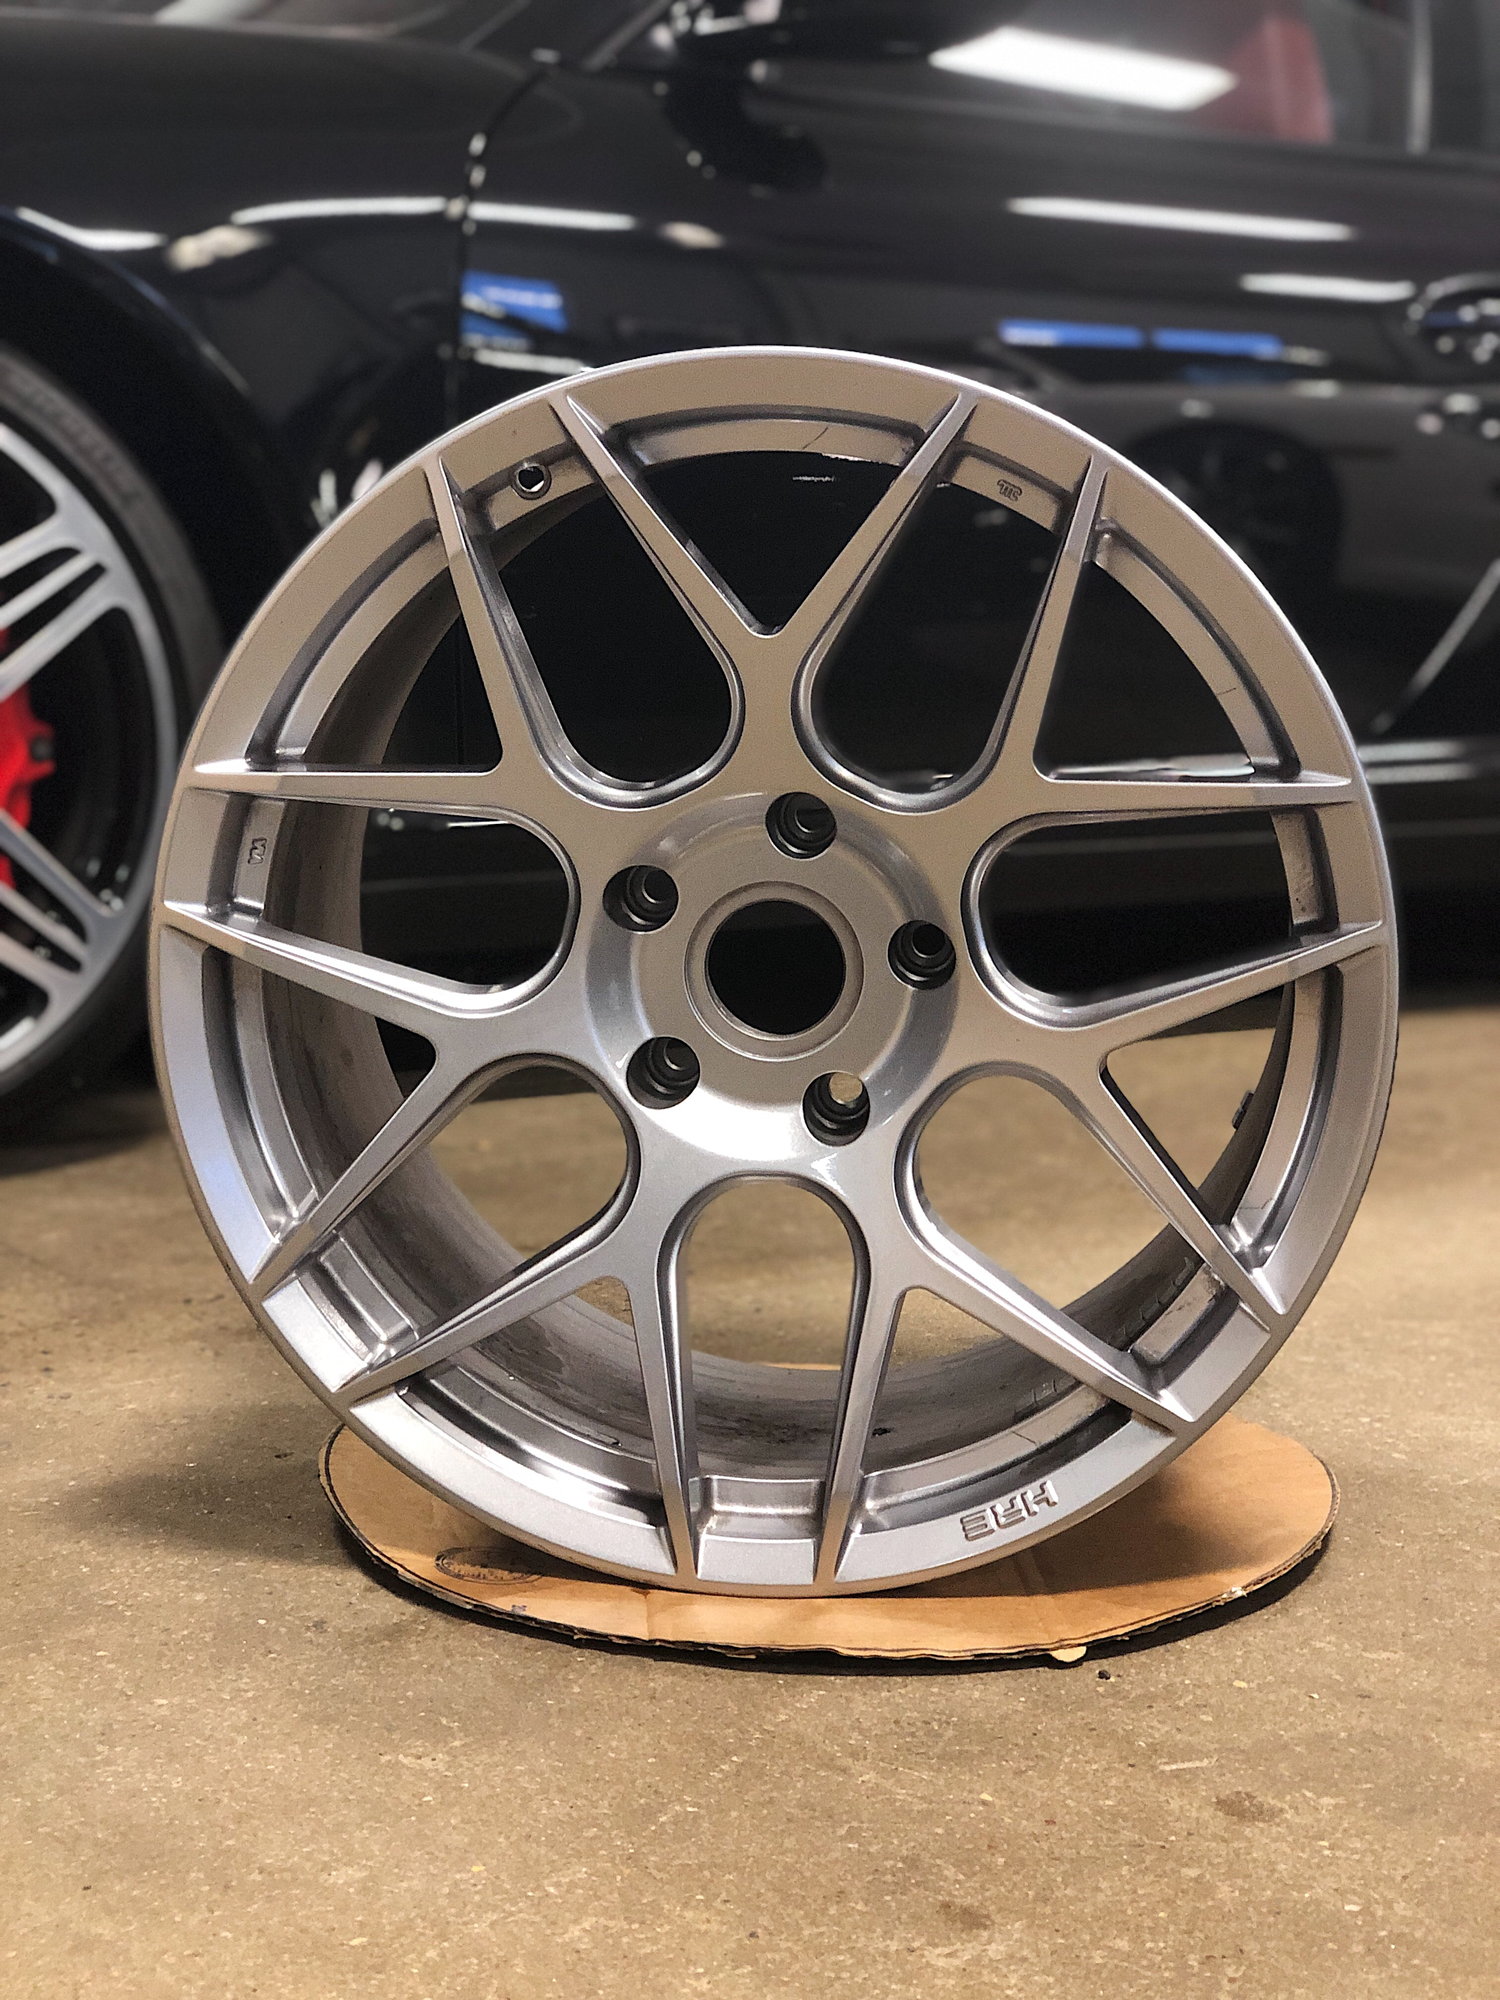 Wheels and Tires/Axles - 19" Inch HRE FF01 7 Spoke Mesh Wheels Porsche 911 997 Turbo Carrera 4 C4S C4 Widebody - Used - 2005 to 2012 Porsche 911 - West Chester, PA 19382, United States